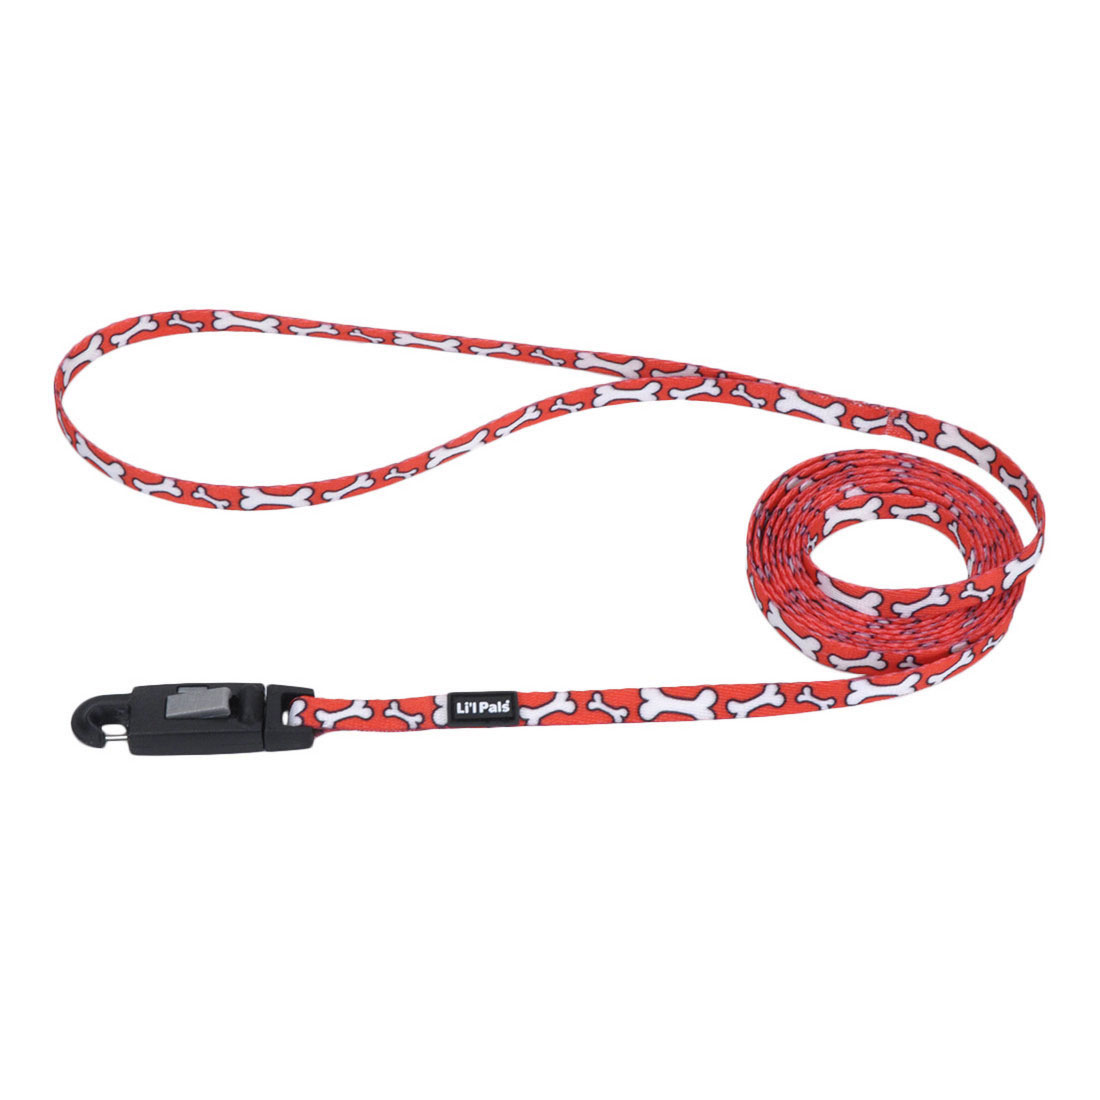 Li'l Pals Patterned Dog Leash with E-Z Snap 3/8"-Red and White Bones